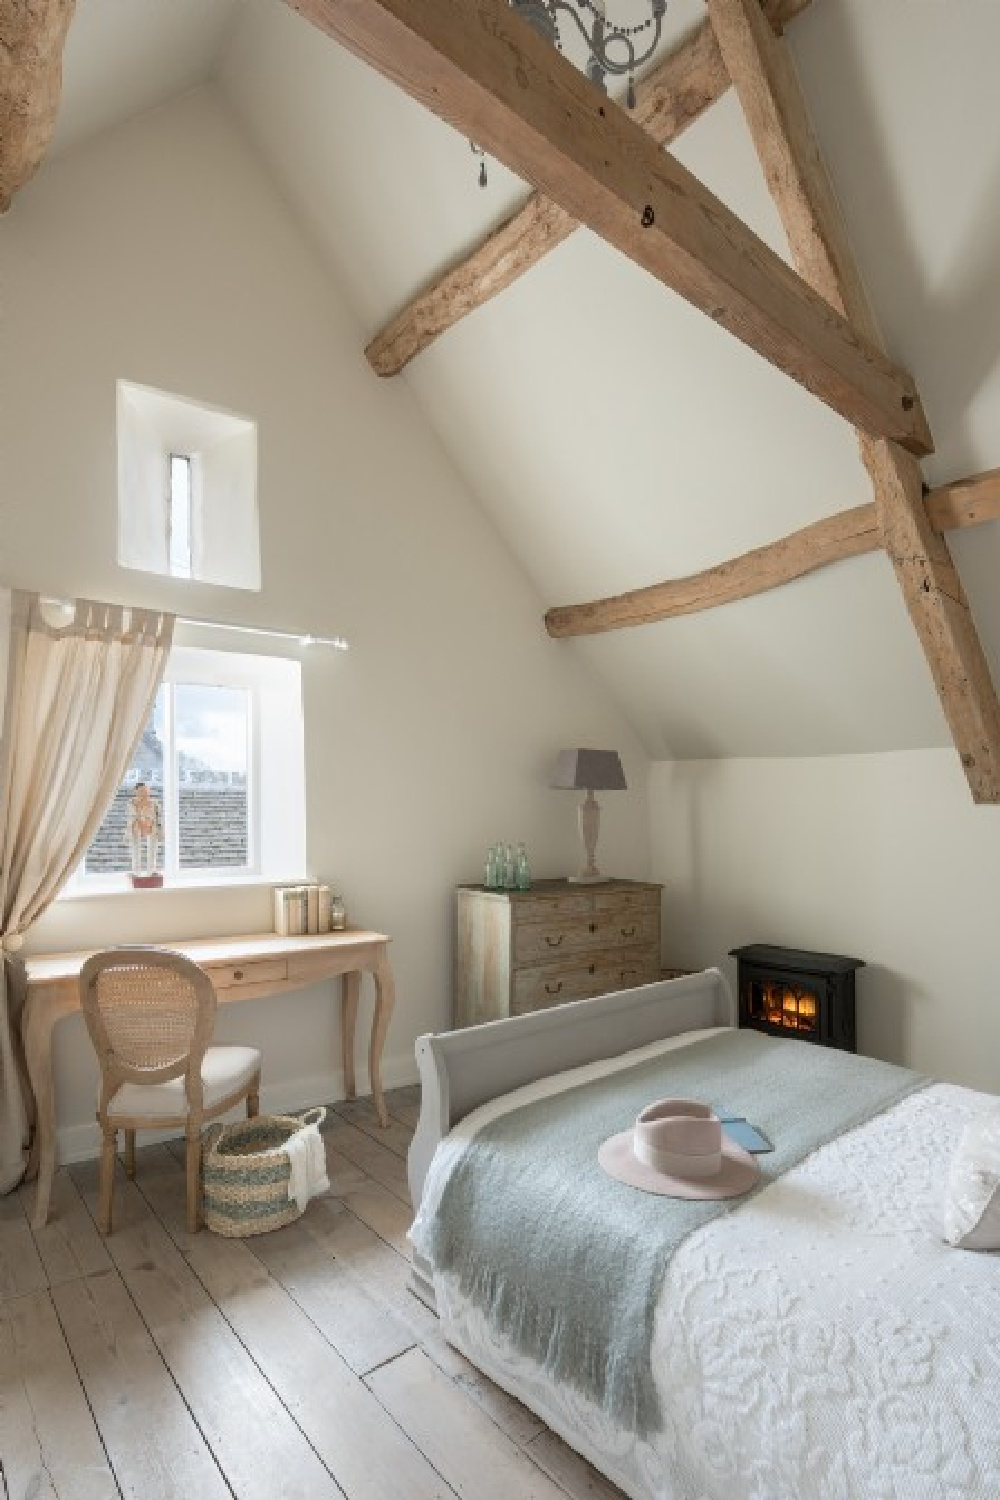 Charming English bedroom at Flower Press holiday rental Biburg Cotswolds. #cotswoldscottage #englishcountry #cottageinteriors